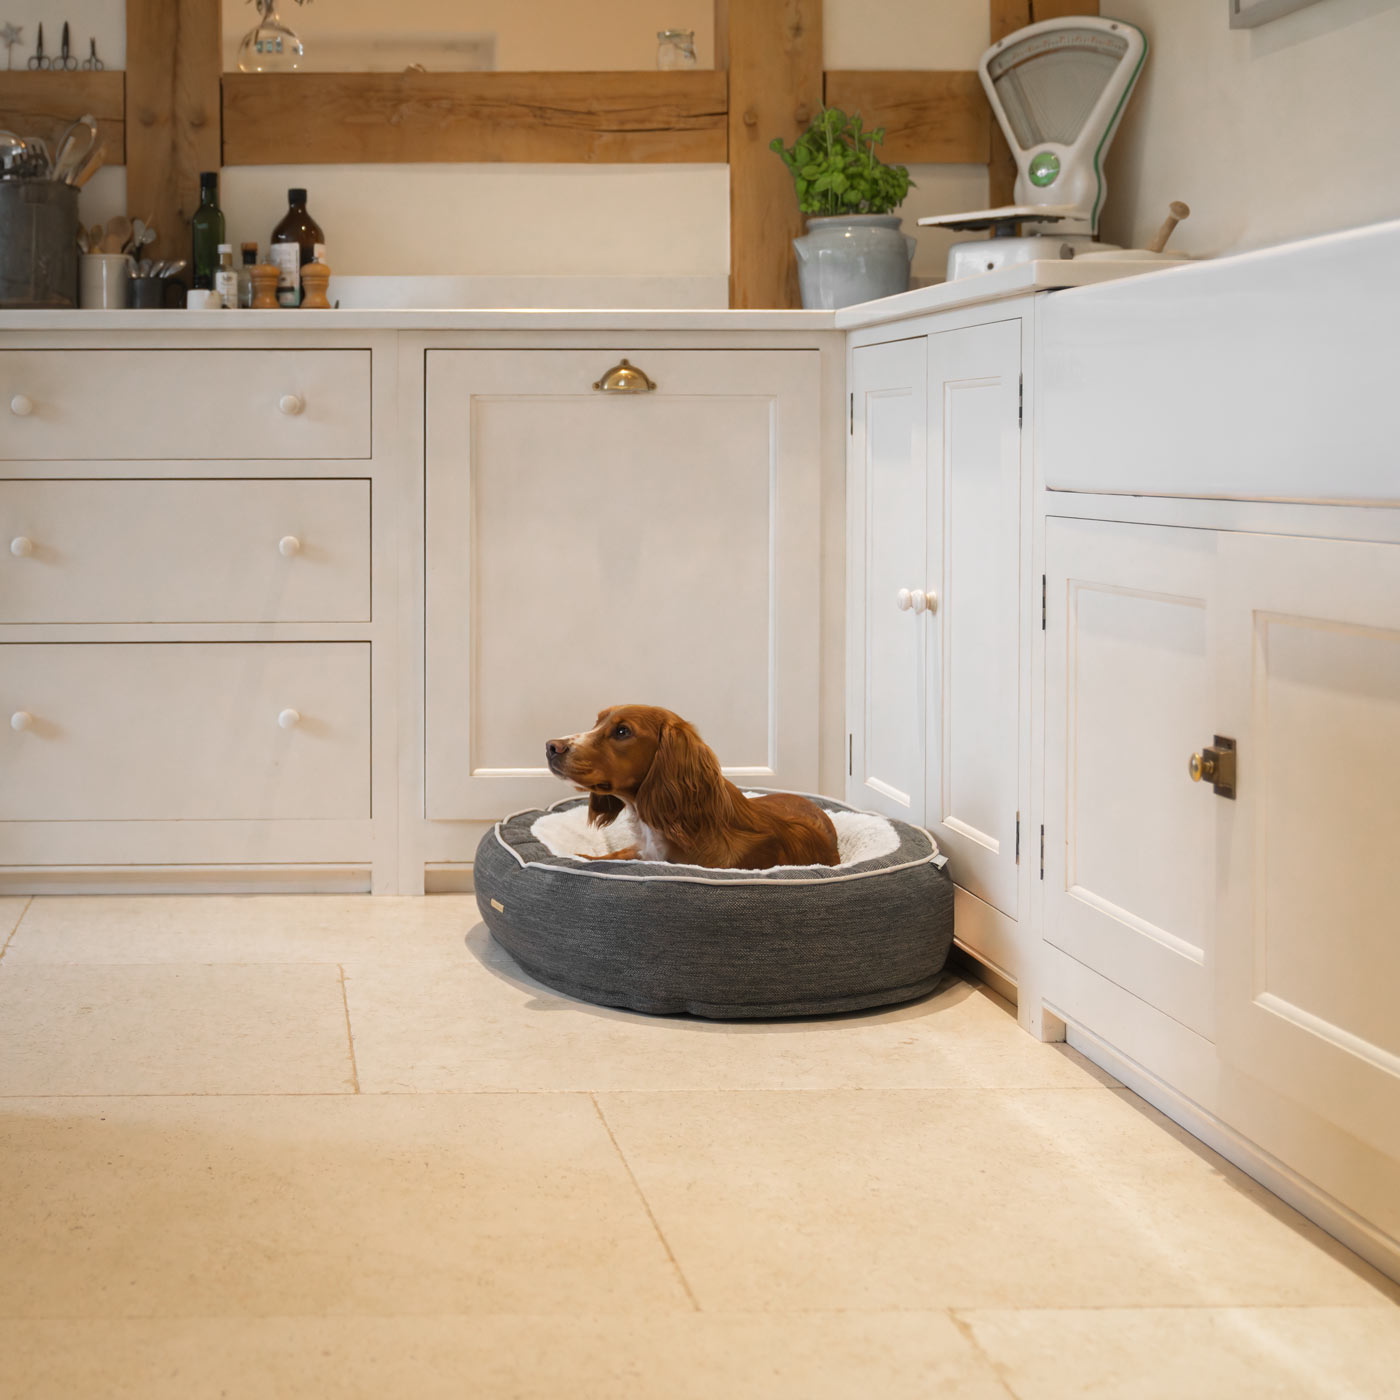 Lords & Labradors "The Nest" Dog Bed